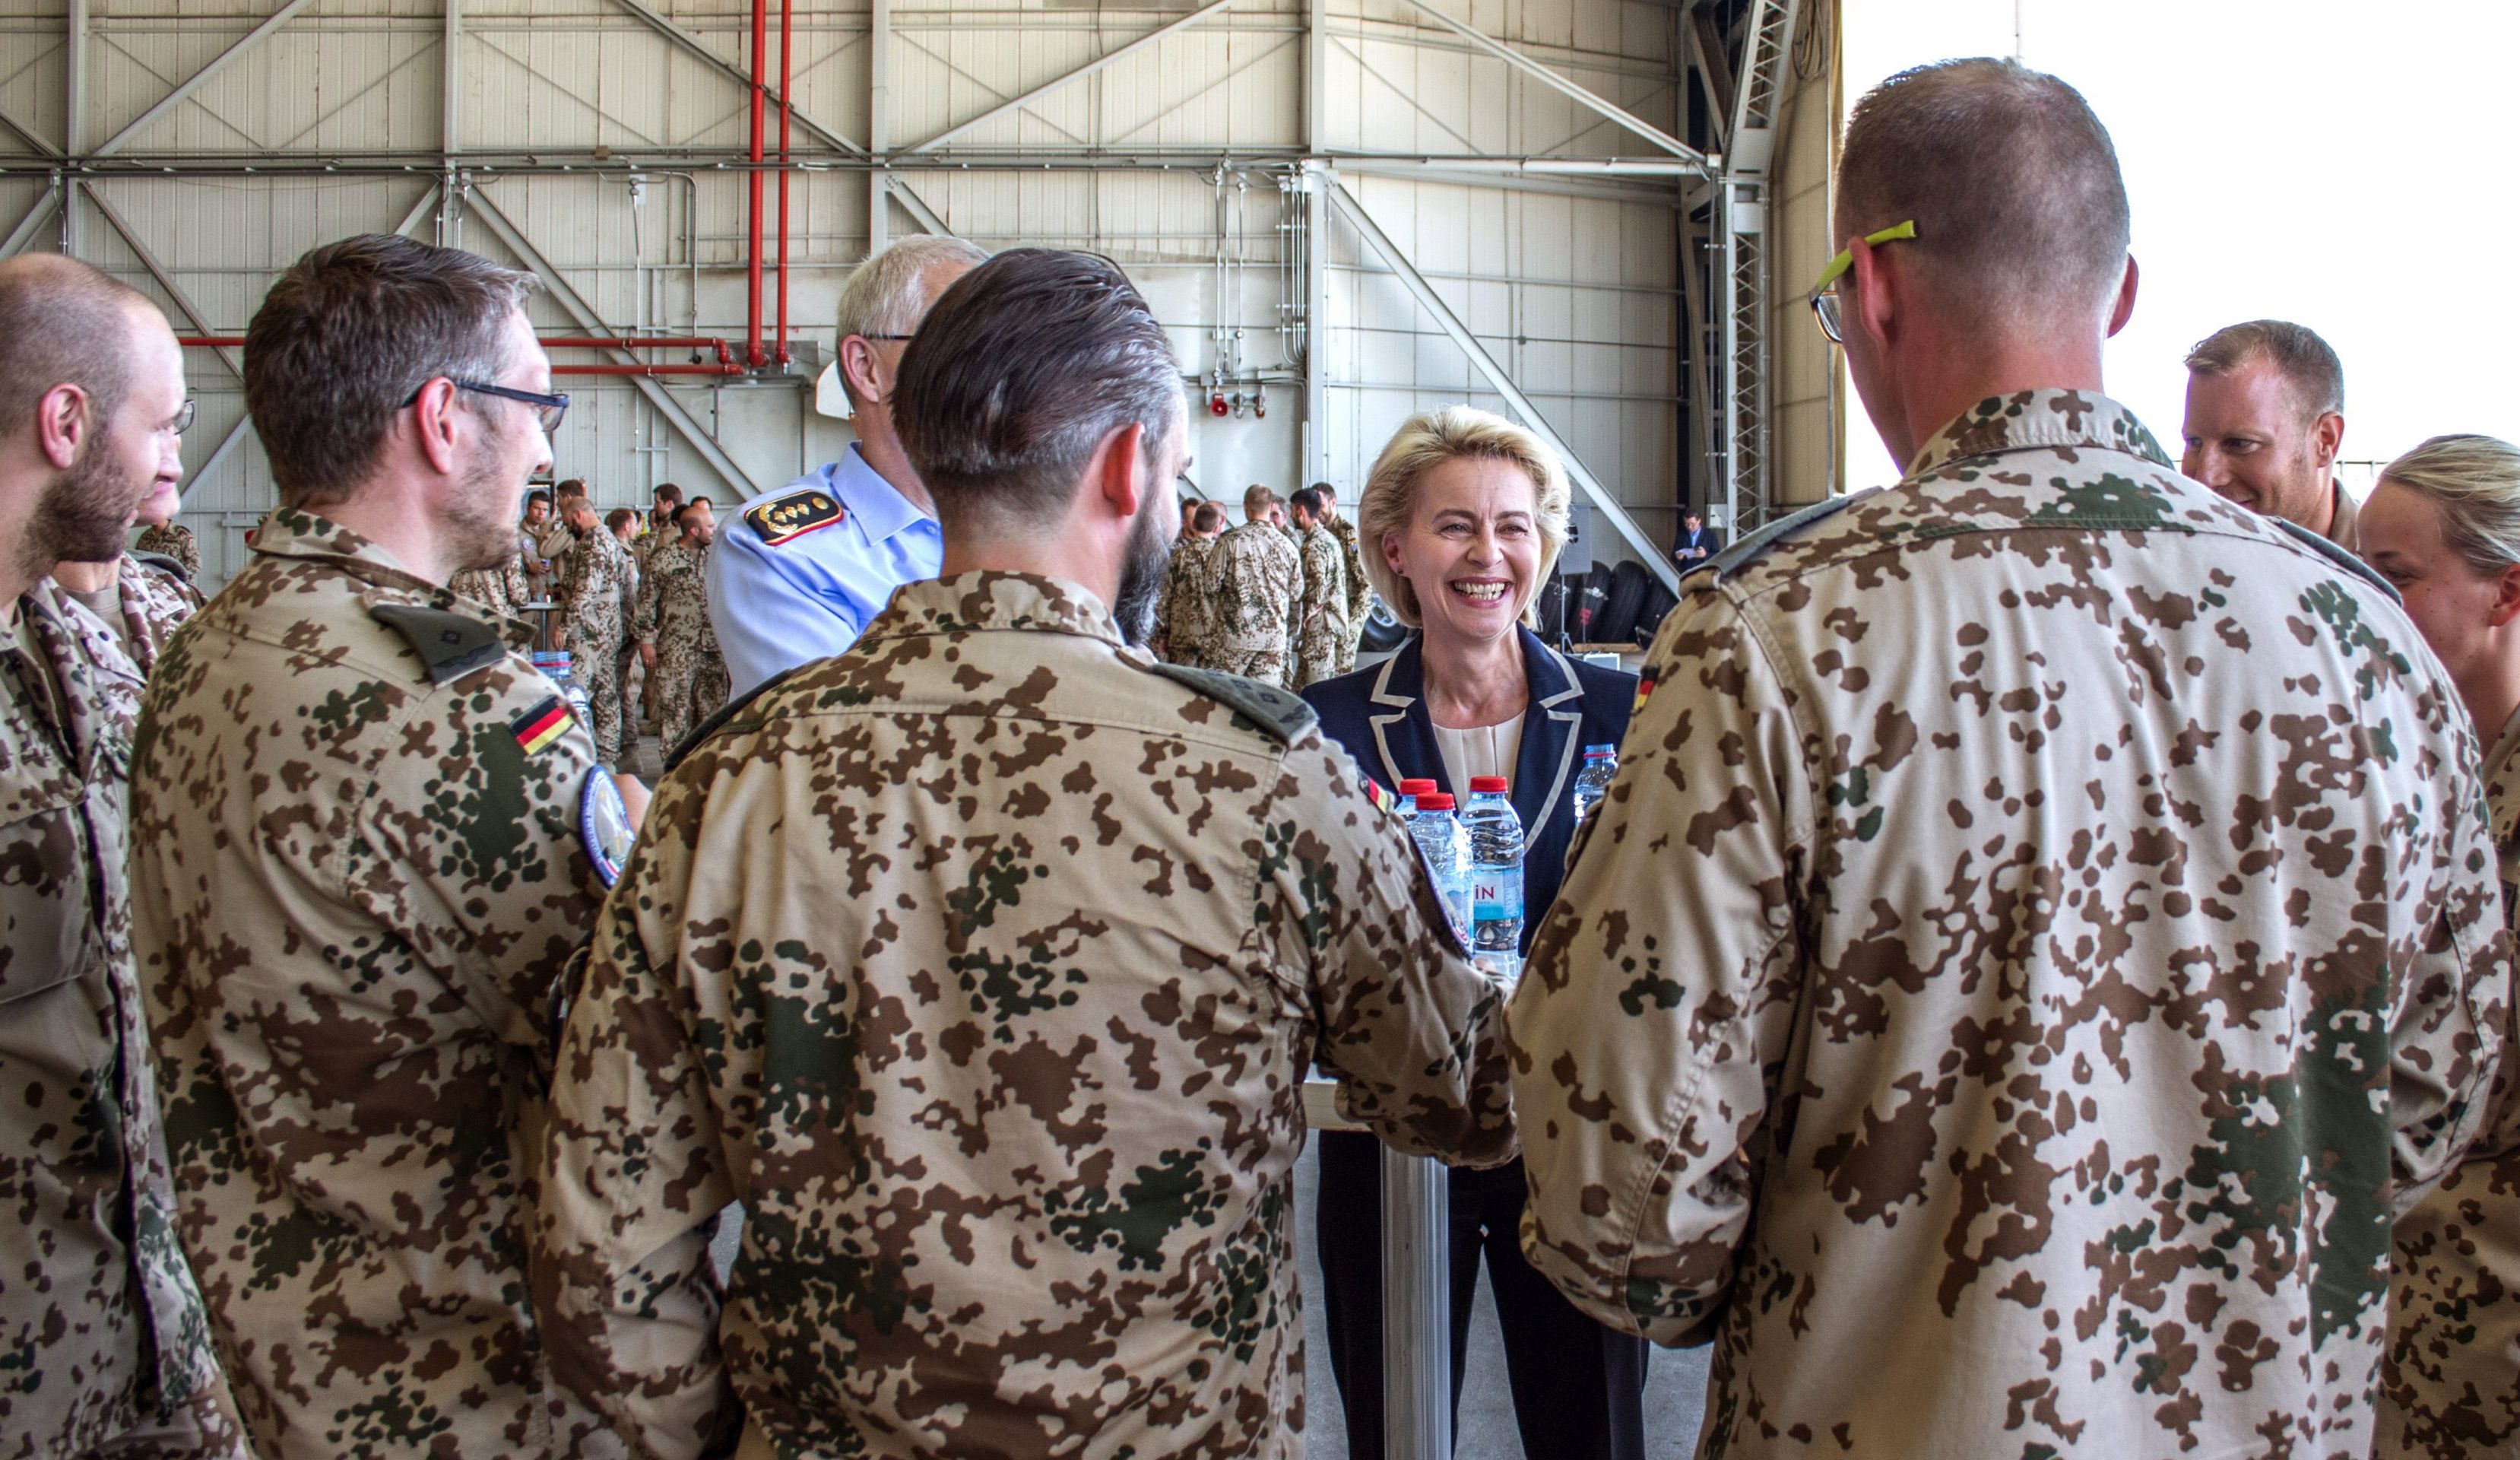 epa05401308 A handout image released by the German Bundeswehr armed forces shows German Minister of Defense Ursula von der Leyen (C) speaking to the soldiers of the German contingent Counter DAESH at the Air Base in Incirlik, Turkey, 01 July 2016. The minister is on a visit to the troops after a row with Turkey over the rights of German lawmakers to visit German troops in Turkey.  EPA/JUERGEN SICKMANN/BUNDESWEHR/PIZ EINSFUEKDO BW / HANDOUT  
(ATTENTION EDITORS: Editorial use only in connection with current reportings/ mandatory credit: Photo: Juergen Sickmann/Bundeswehr/PIZ EinsFueKdo Bw/dpa via European Pressphoto Agency (epa) HANDOUT EDITORIAL USE ONLY